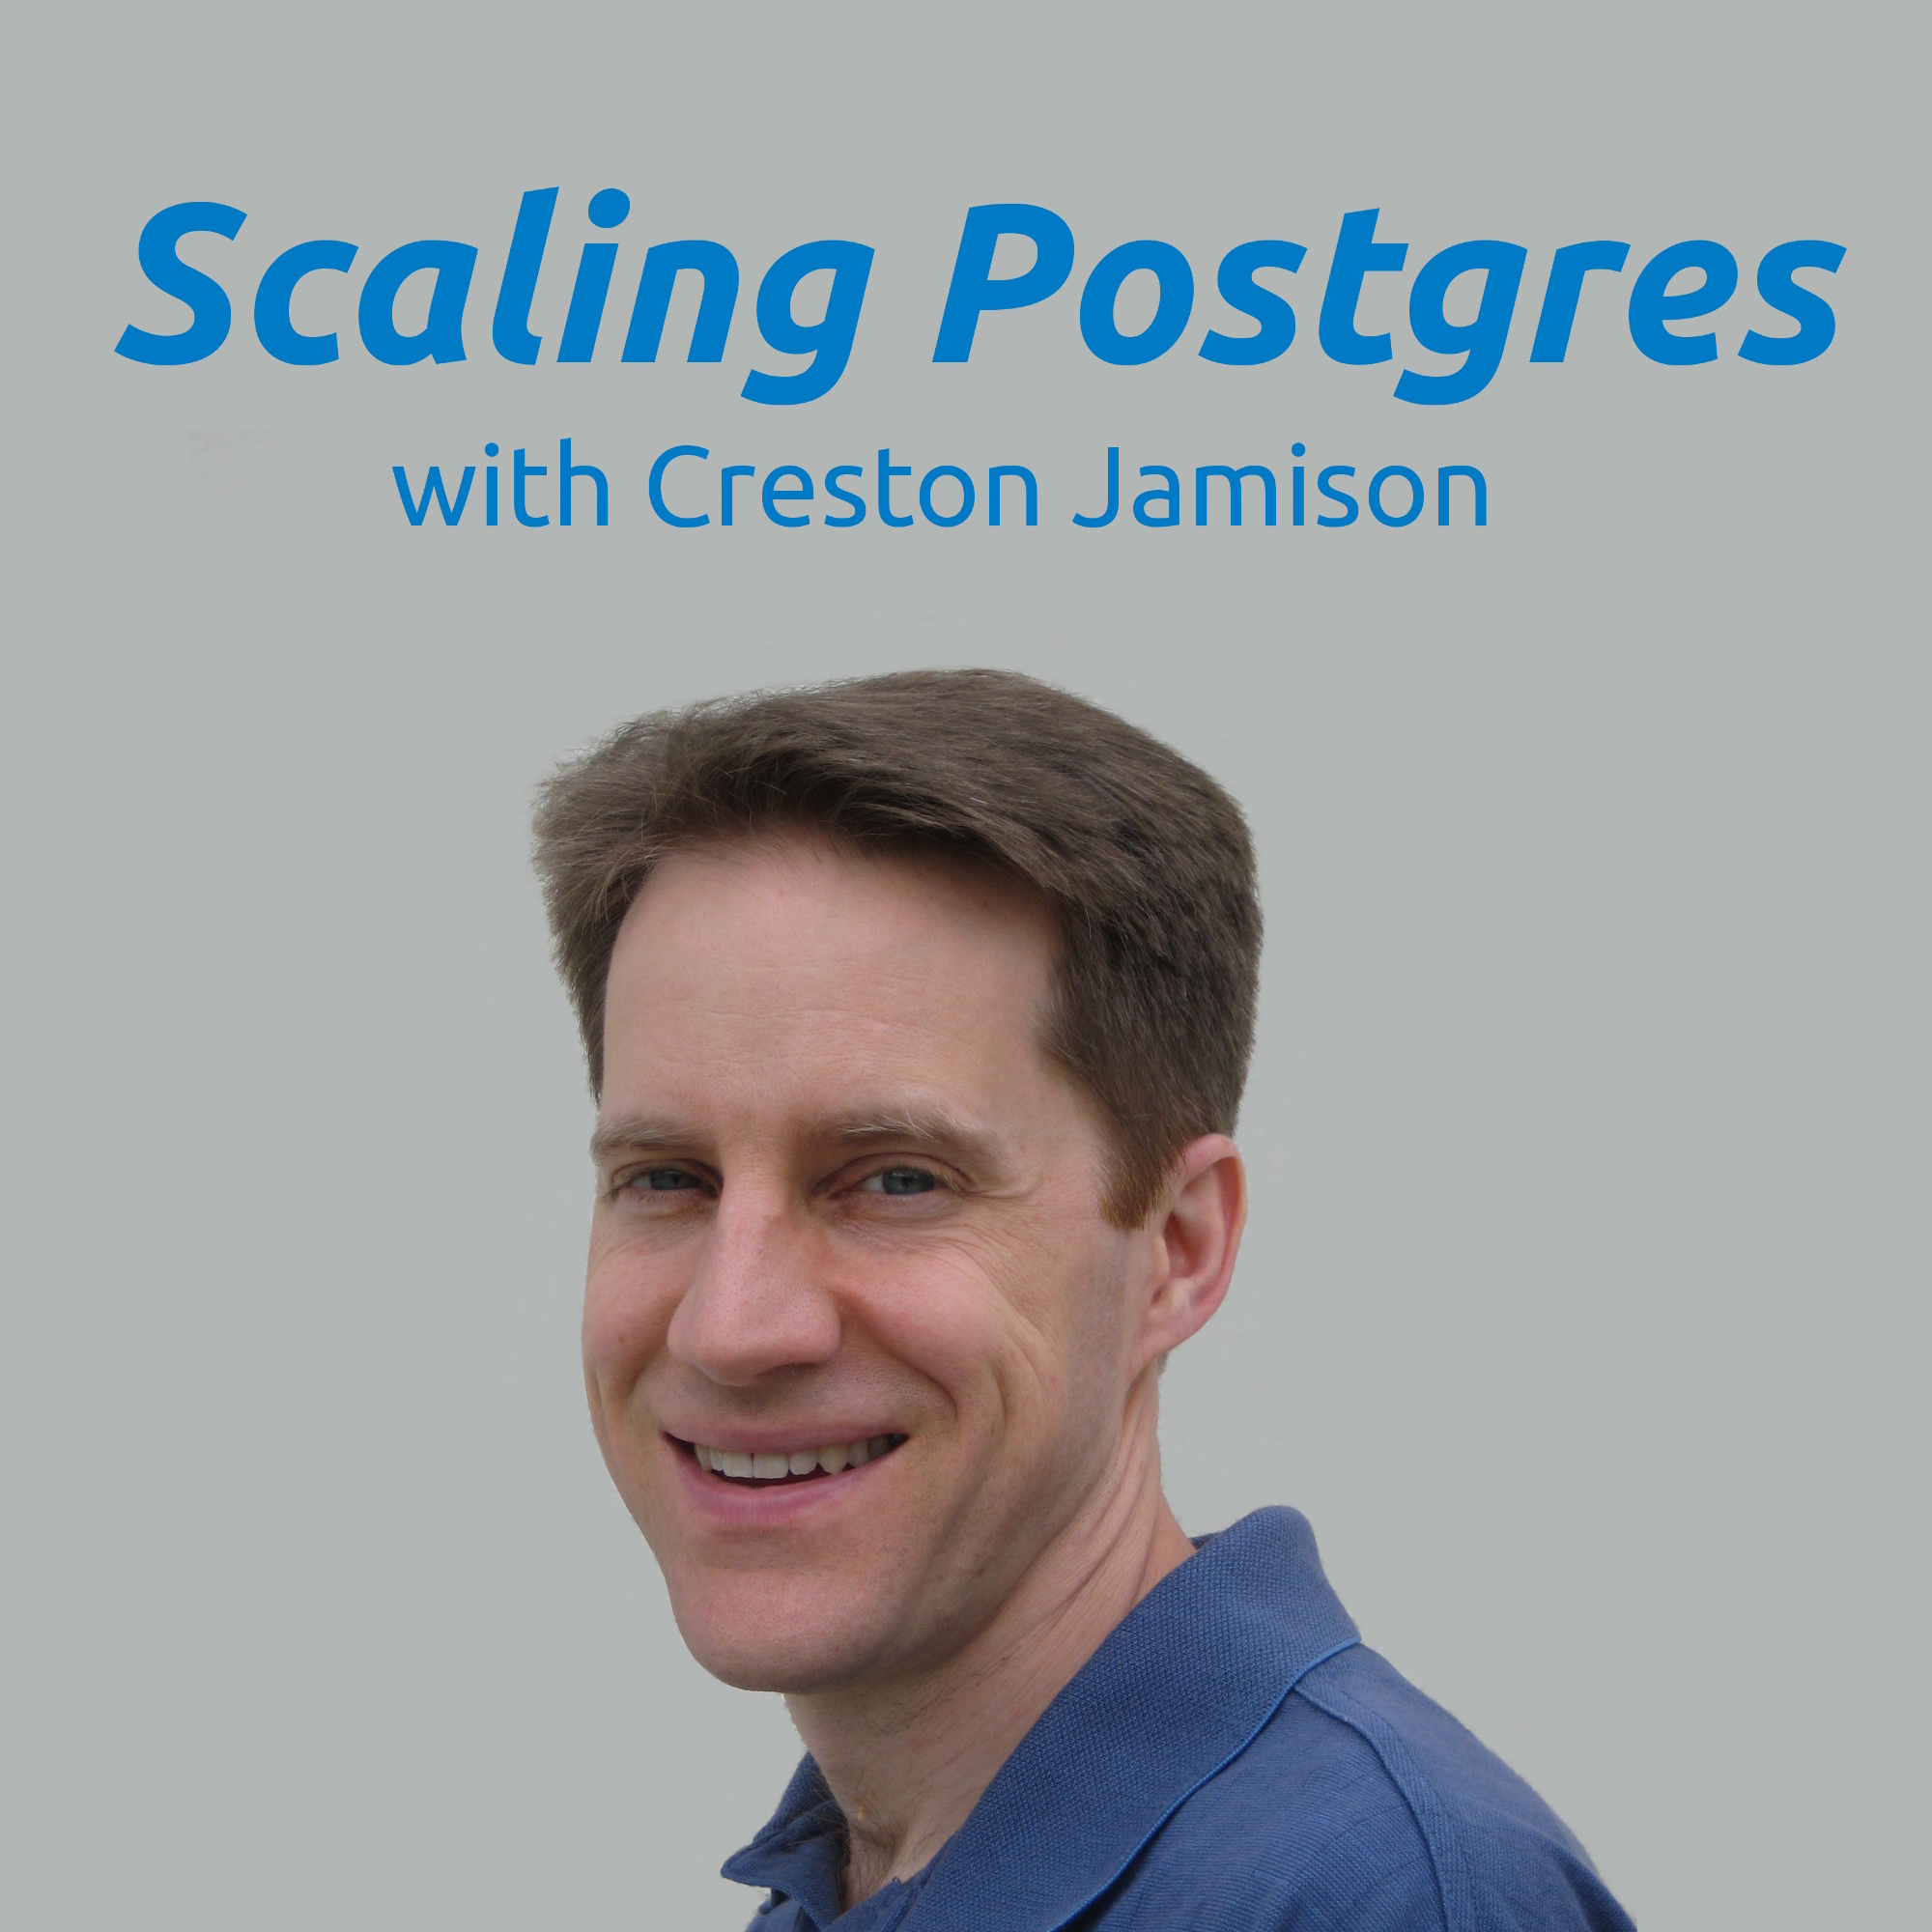 Vacuum Speed Up, Faster Foreign Tables, Fast Queries With Union, Query Optimizer | Scaling Postgres 158